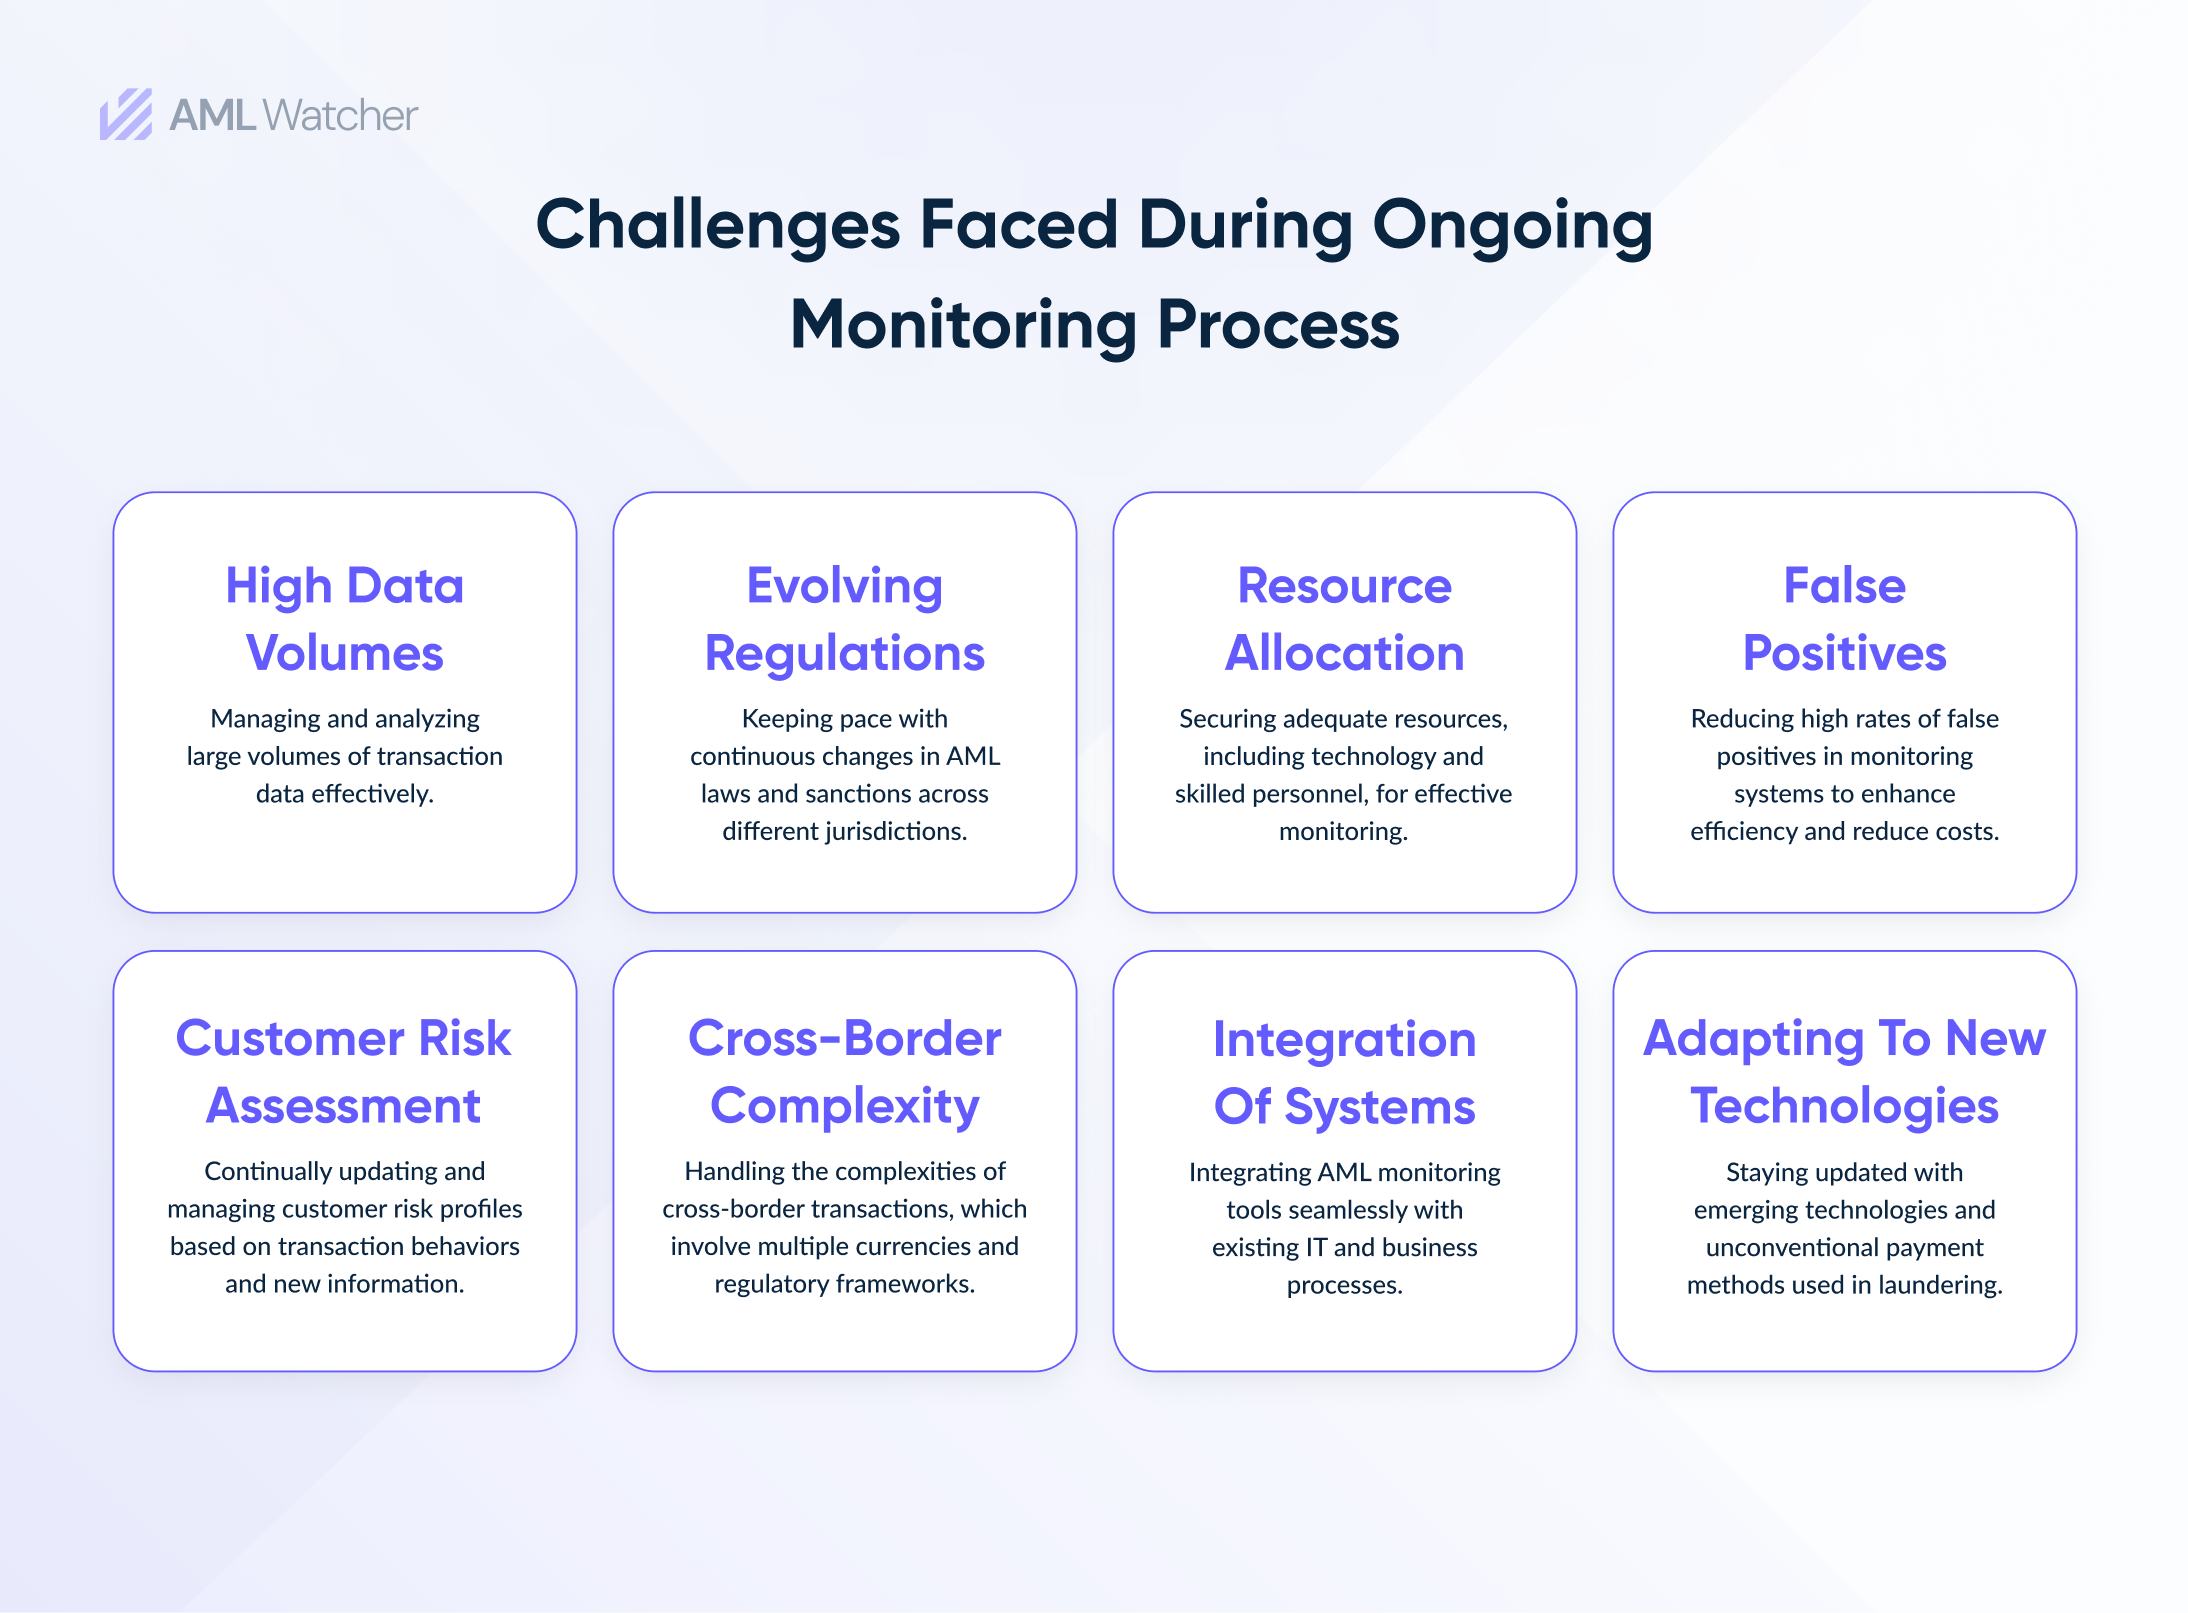 This image shows the challenges faced by organizations in conducting regular AML monitoring